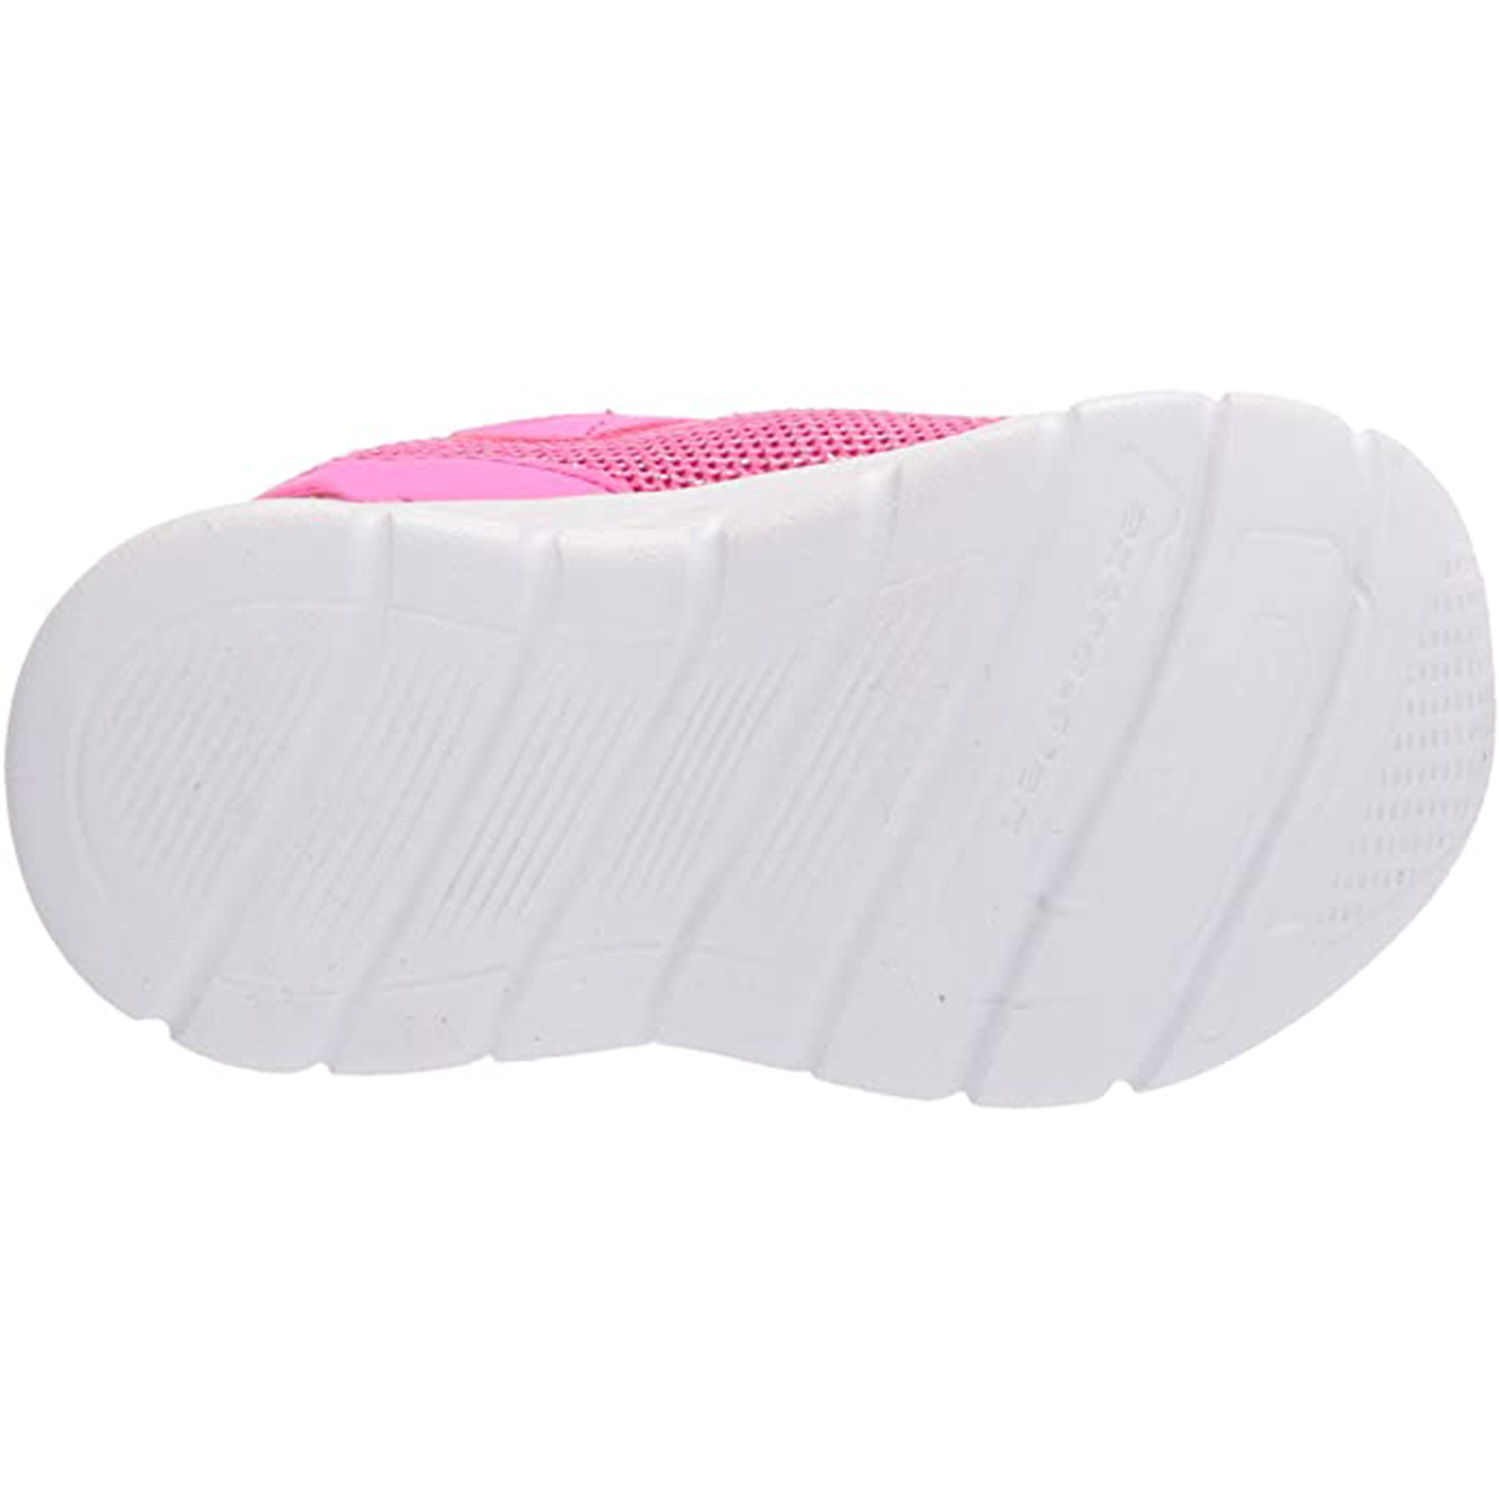 Skechers TODDLERS Comfy Flex MOVING ON Sneakers baby pink